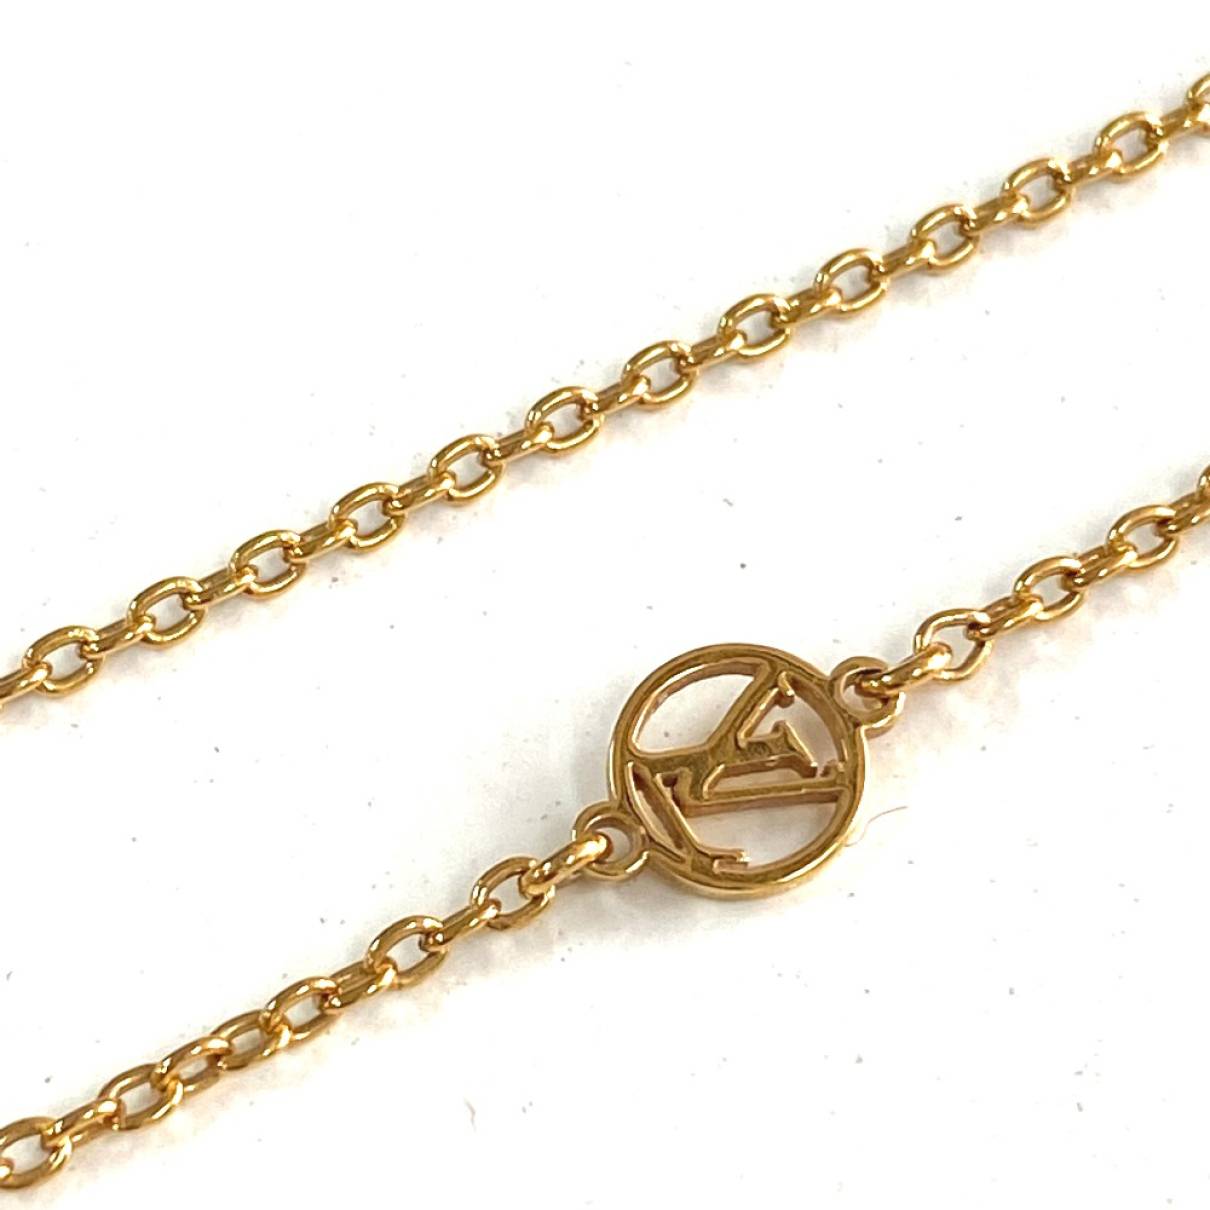 Original Louis Vuitton LV Necklaces For Men And Women Jewelry